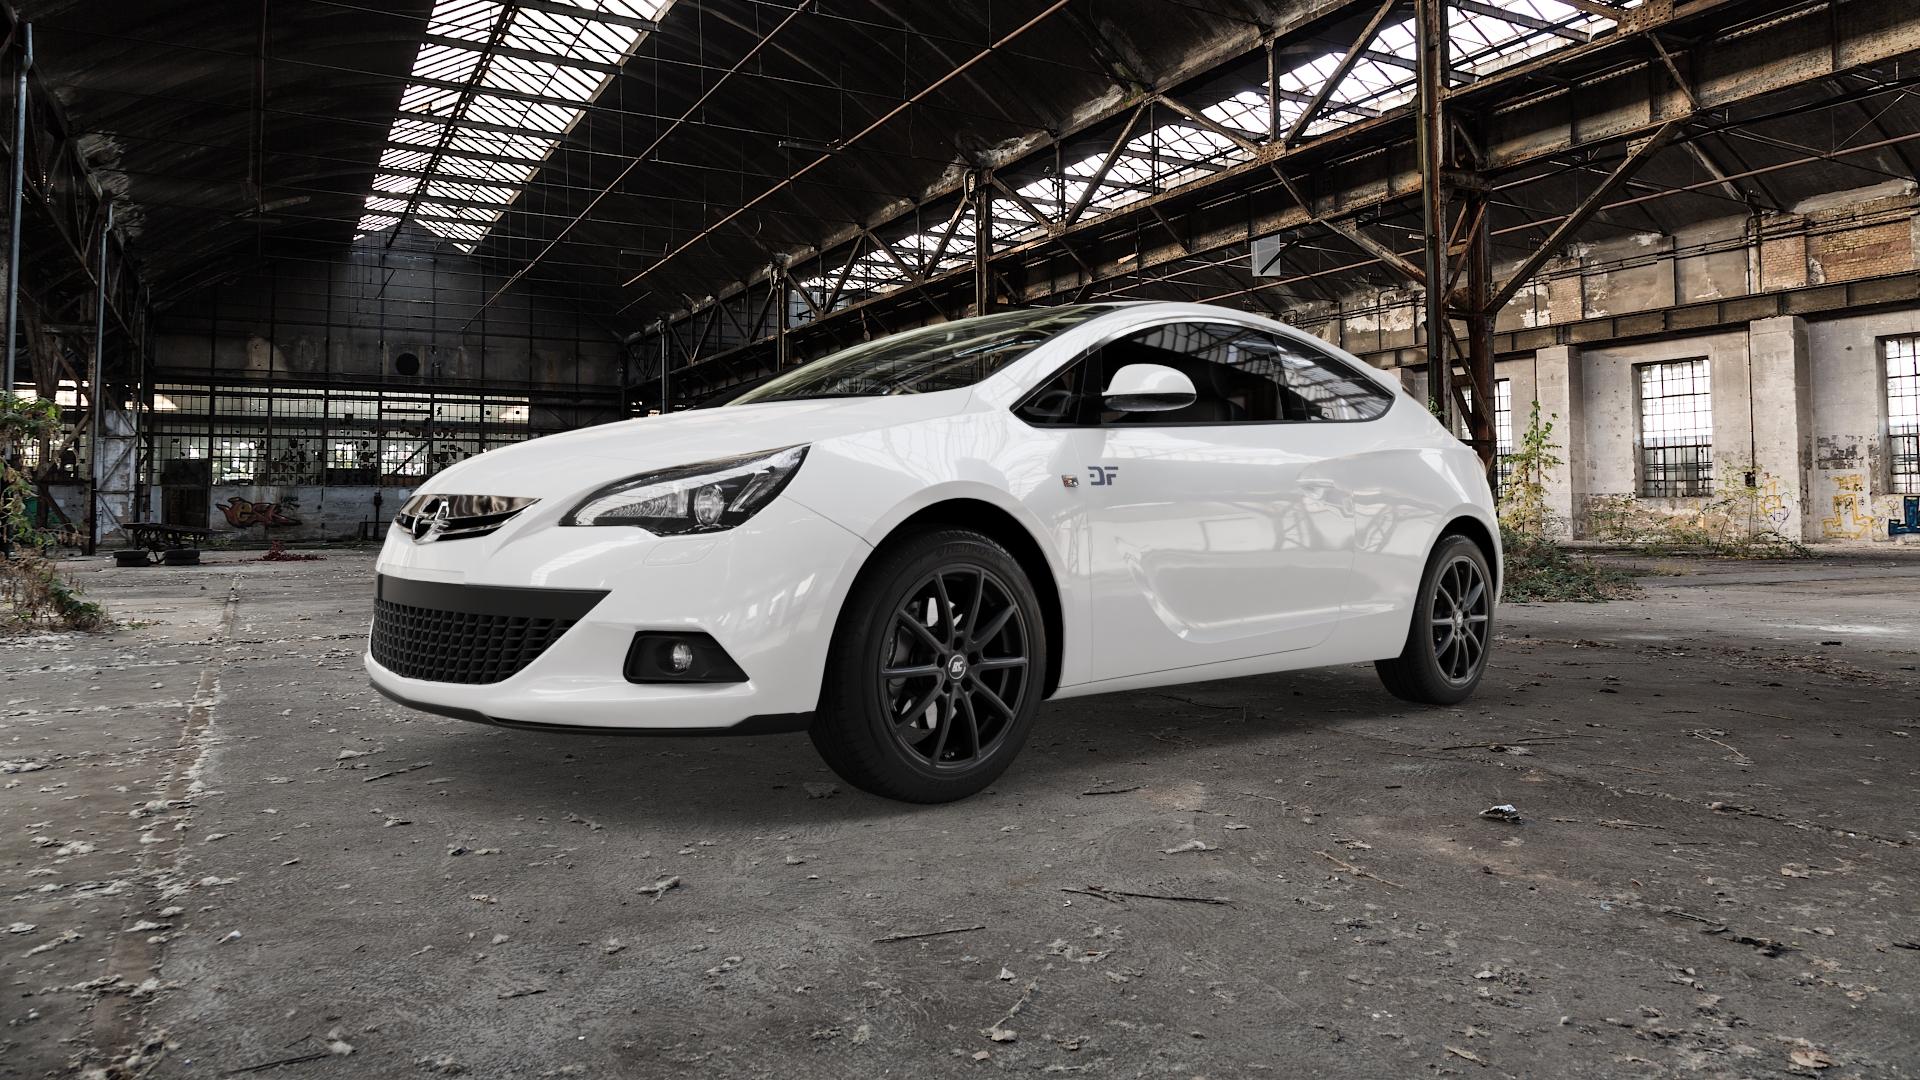 Opel Astra J GTC Type P-J/SW 2,0l OPC 206kW (280 hp) Wheels and Tyre  Packages | velonity.com